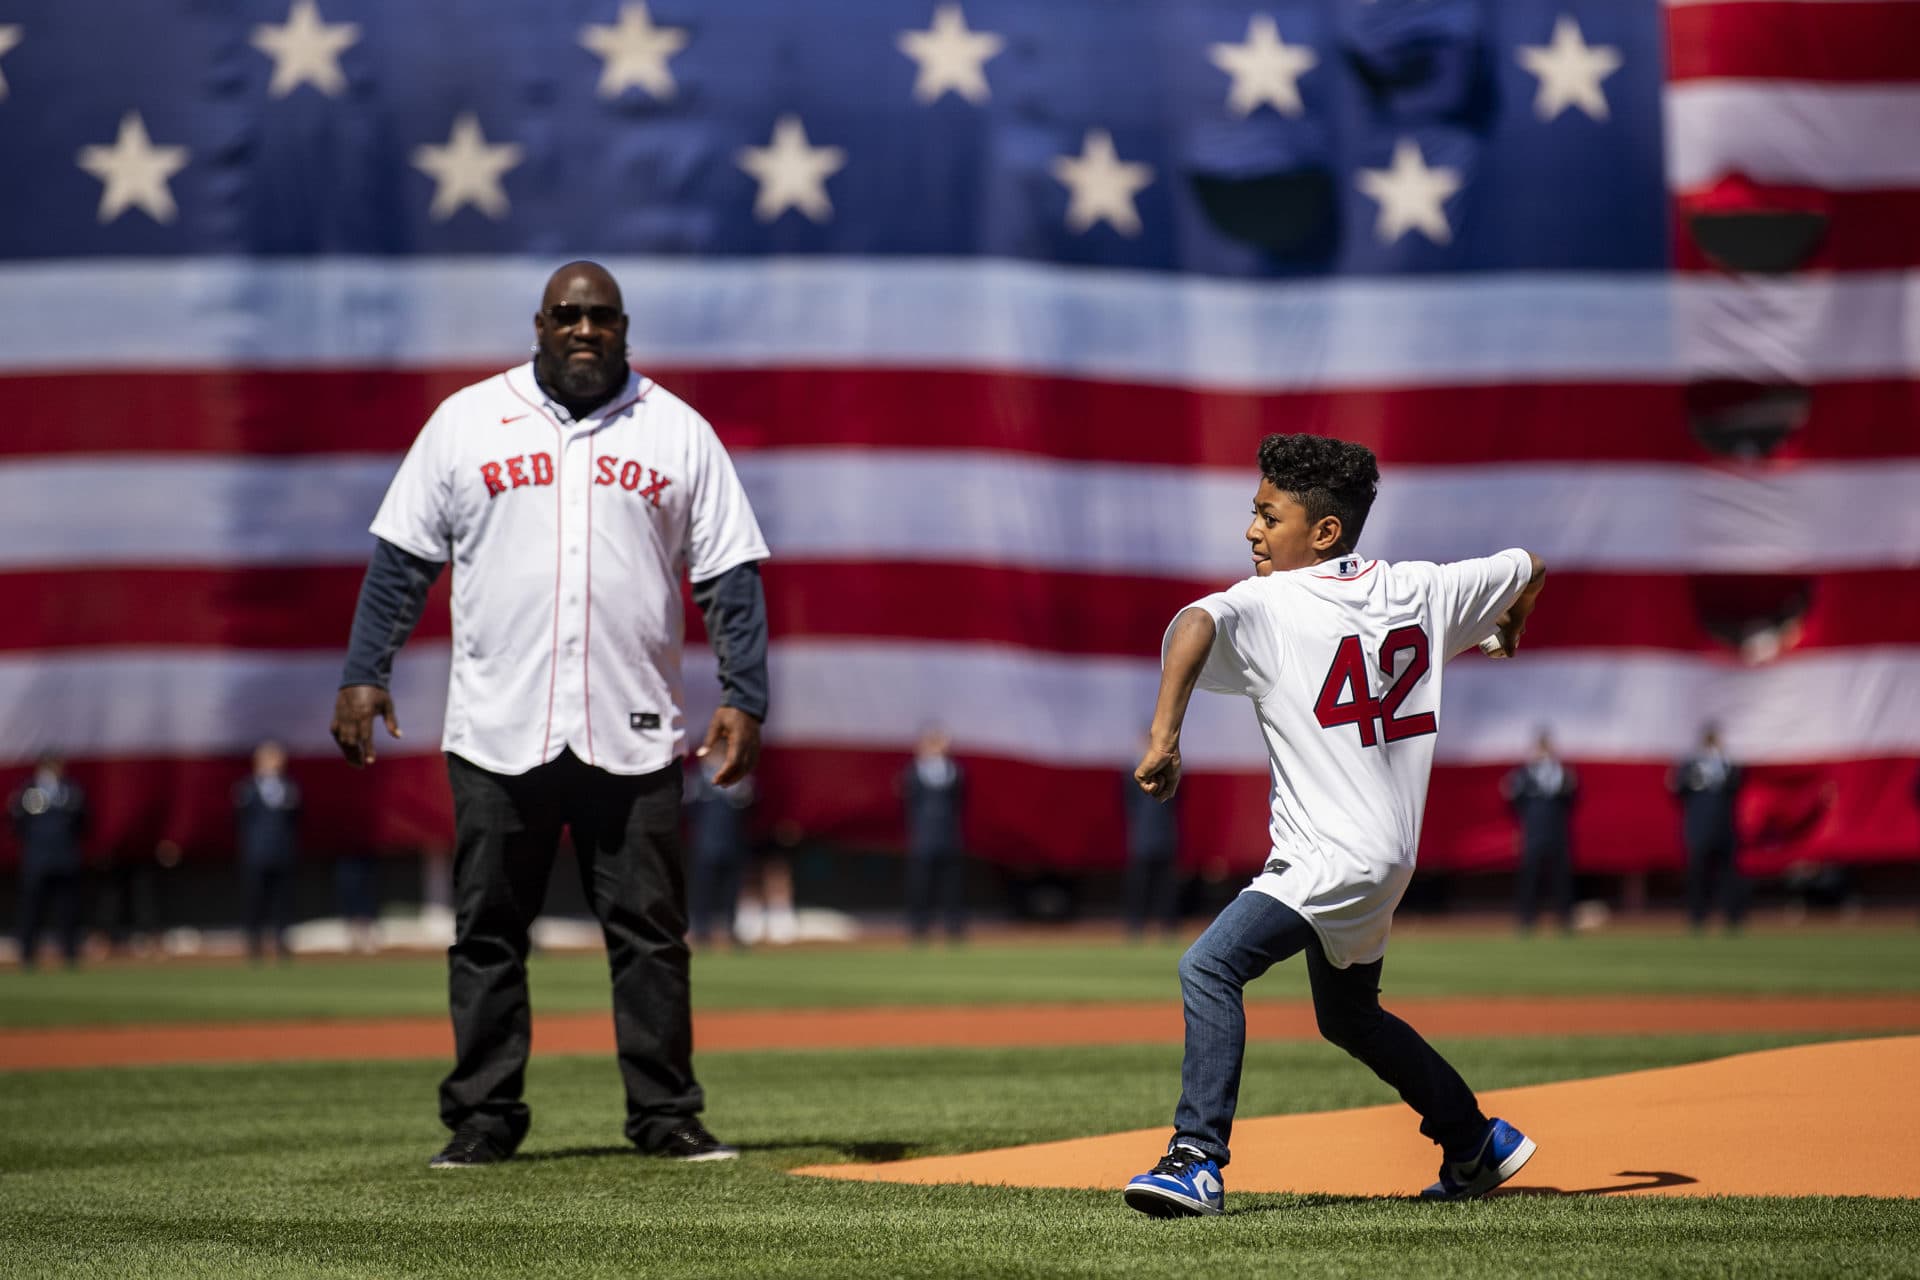 Former player Mo Vaughn of the Boston Red Sox watches as his son, Lee, throws out the ceremonial first pitch before the opening day game against the Minnesota Twins at Fenway Park. (Billie Weiss/Boston Red Sox/Getty Images)